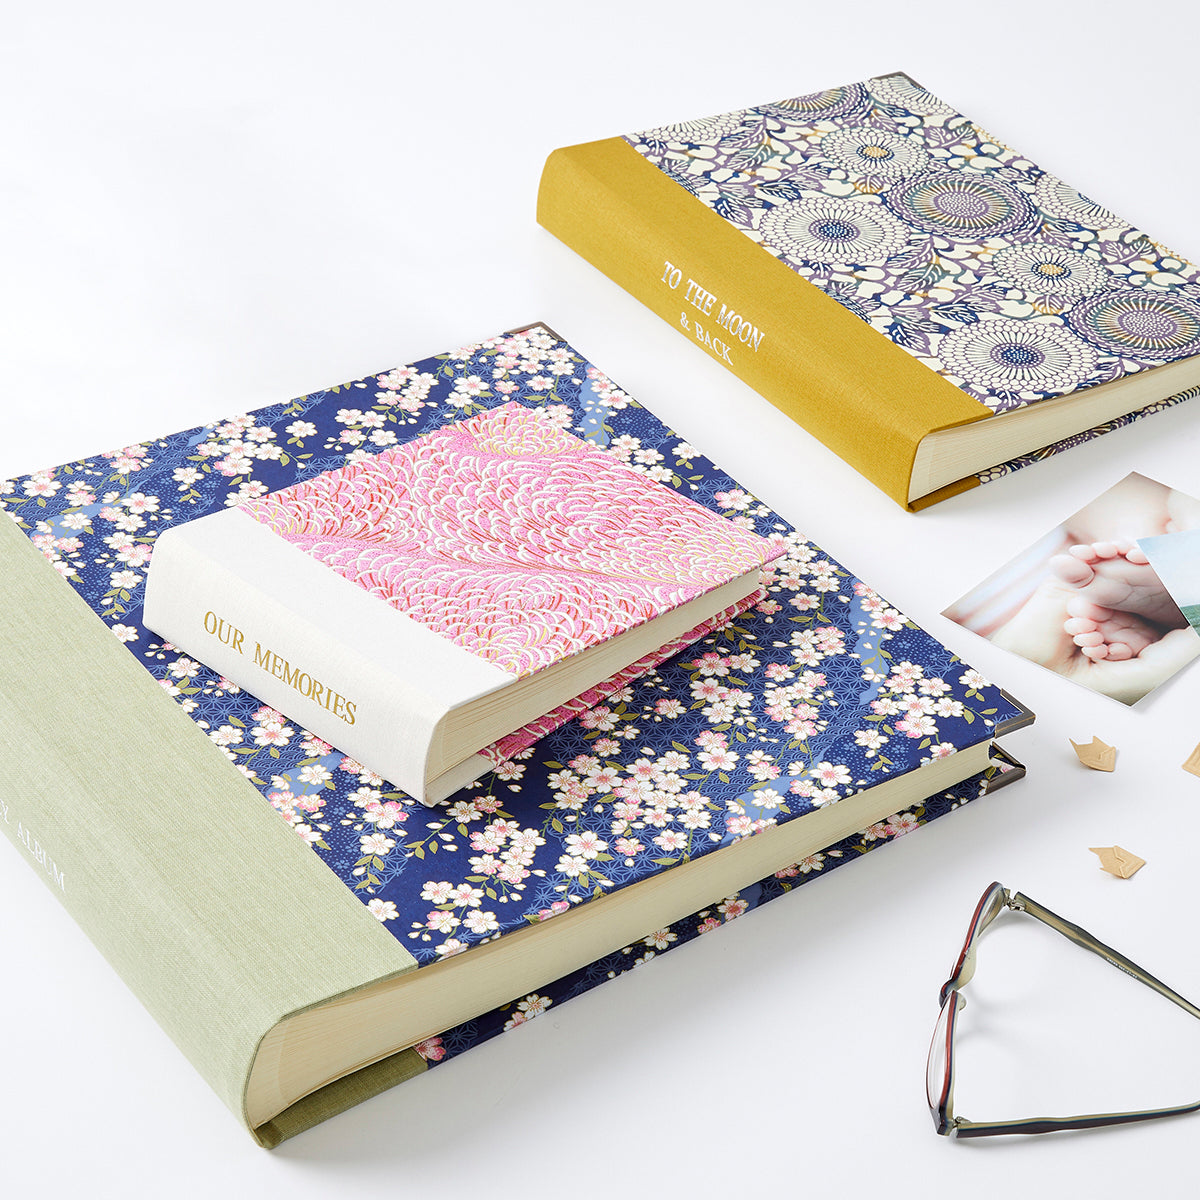 Patterned Photo Albums